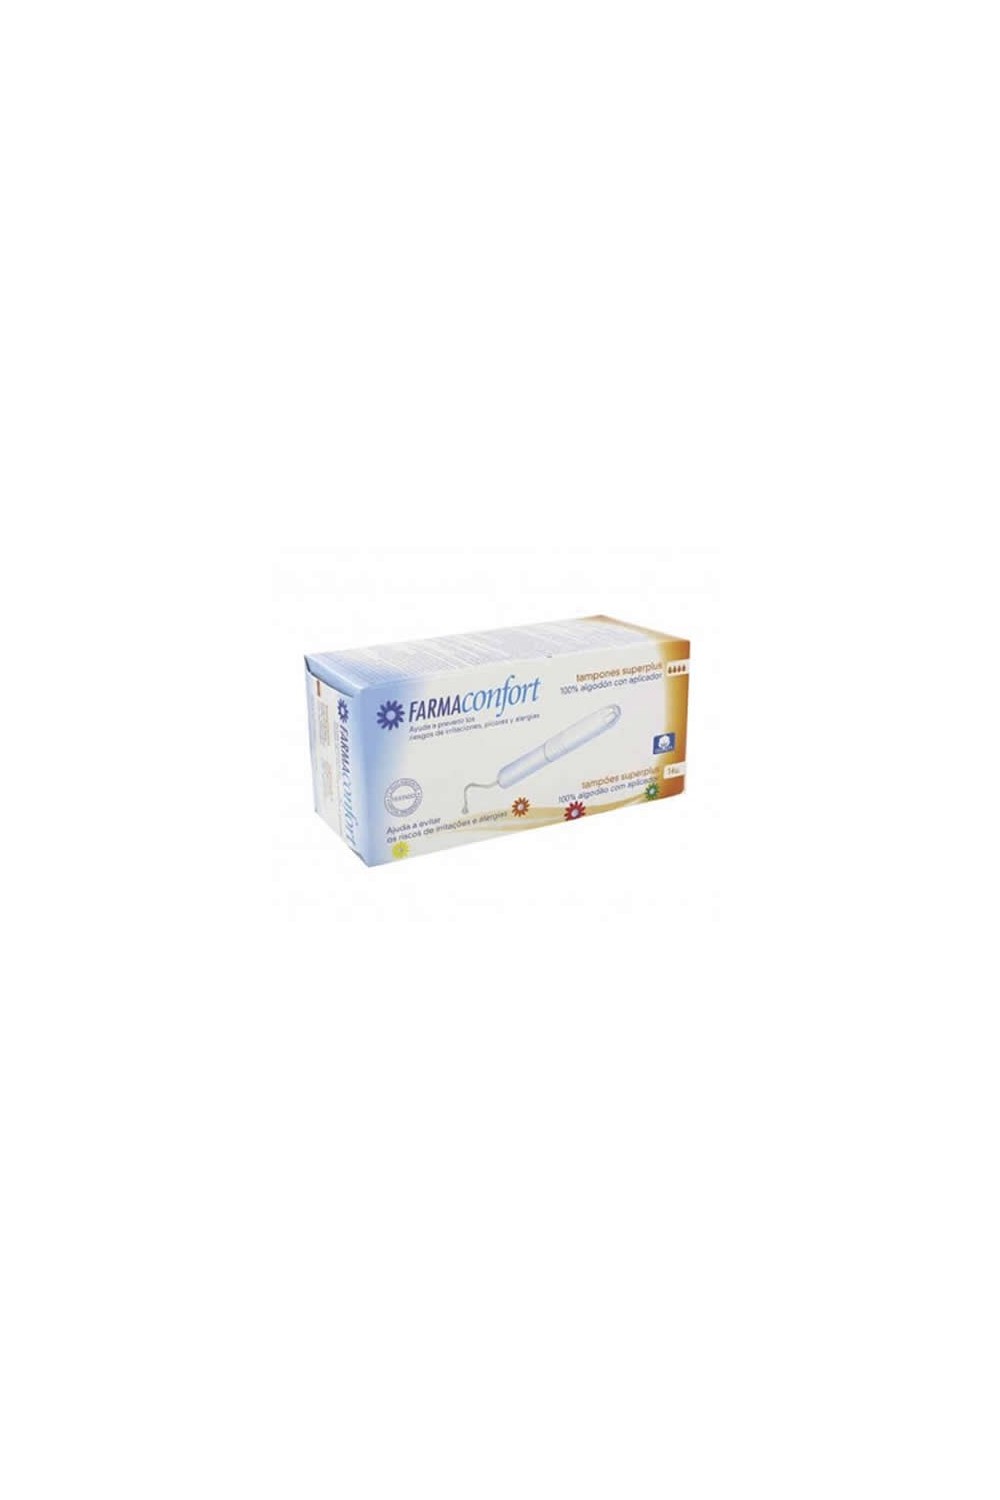 FarmaConfort Cotton Tampons With Applicator Size Superplus 14 Units